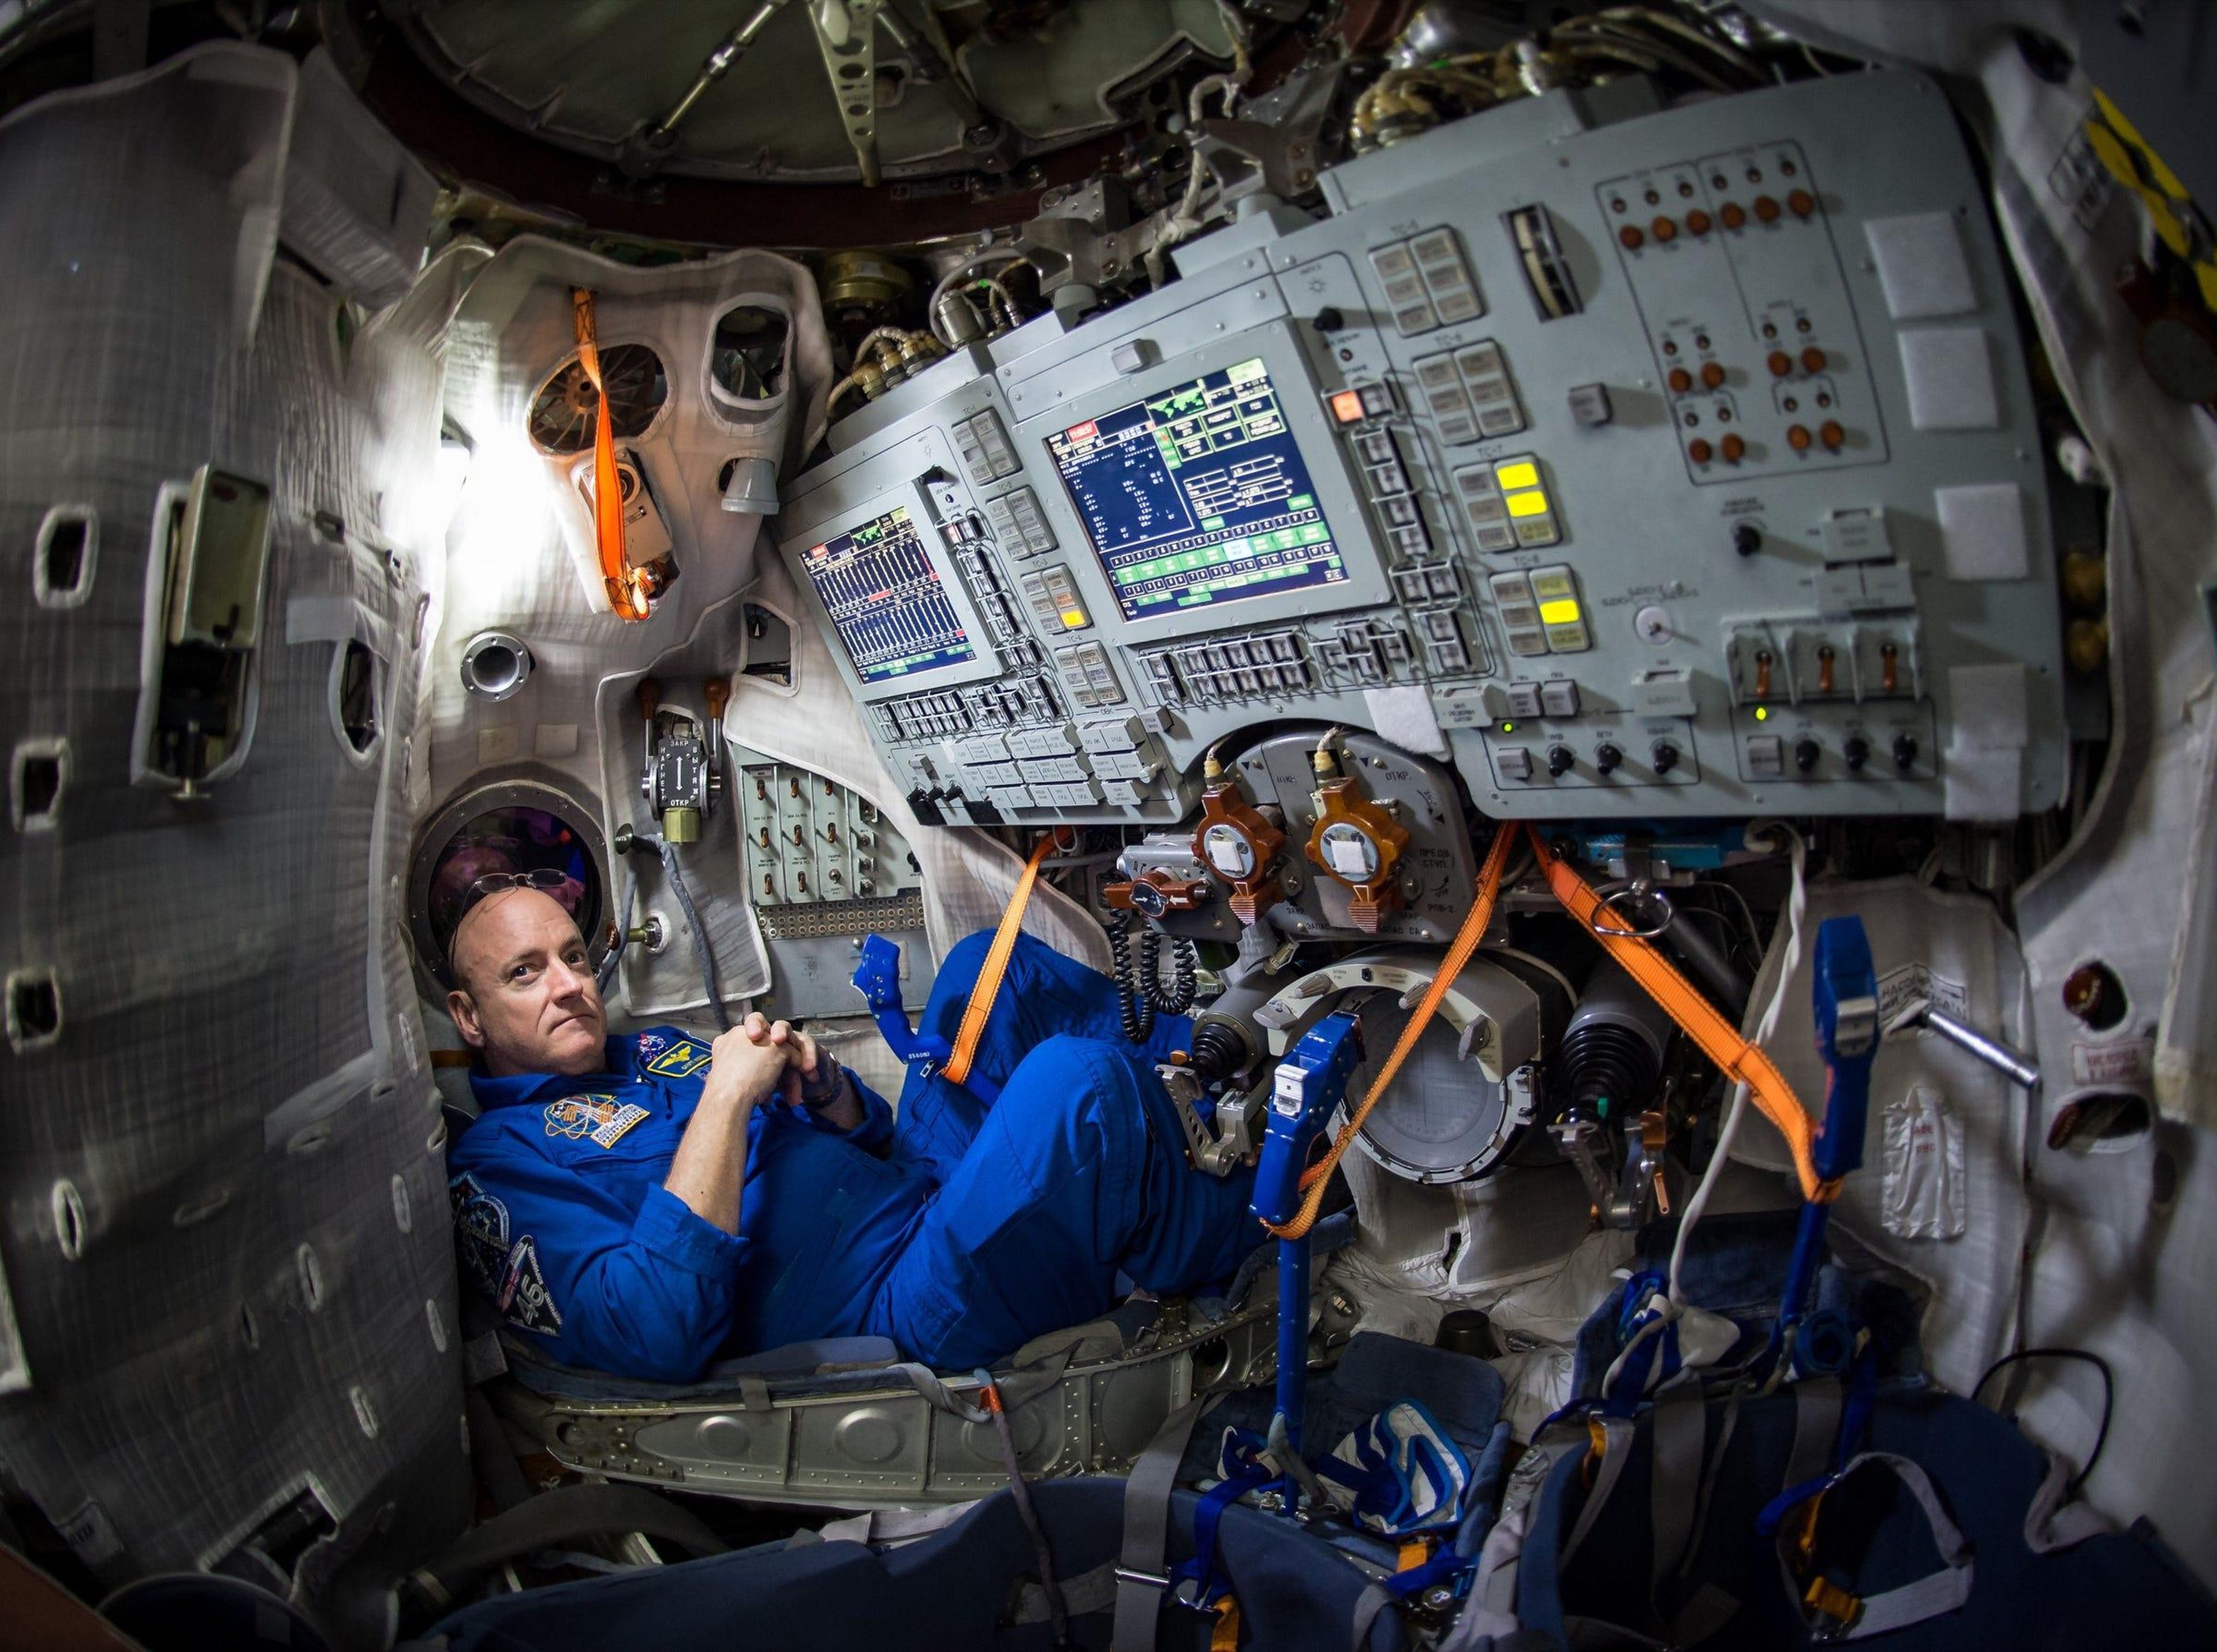 NASA astronaut Scott Kelly is seen inside a Soyuz simulator at the Gagarin Cosmonaut Training Center, March 4, 2015 in Star City, Russia.